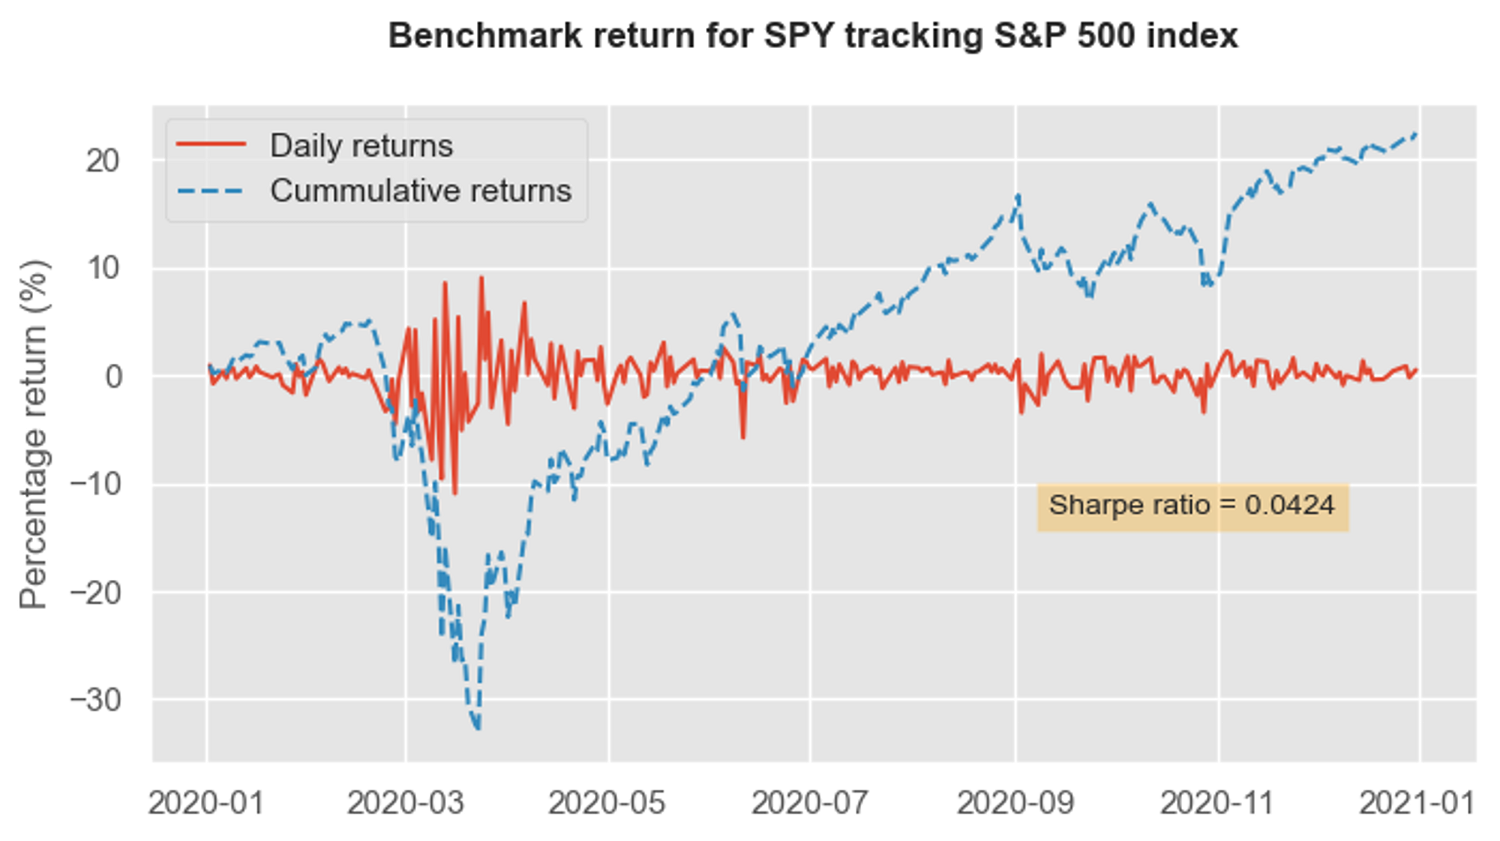 SPY tracking the S&P 500 withered massive downfall of ~30% due to the Covid-19 market crash in early 2020, bouncing back strongly to return ~20% by year end. 